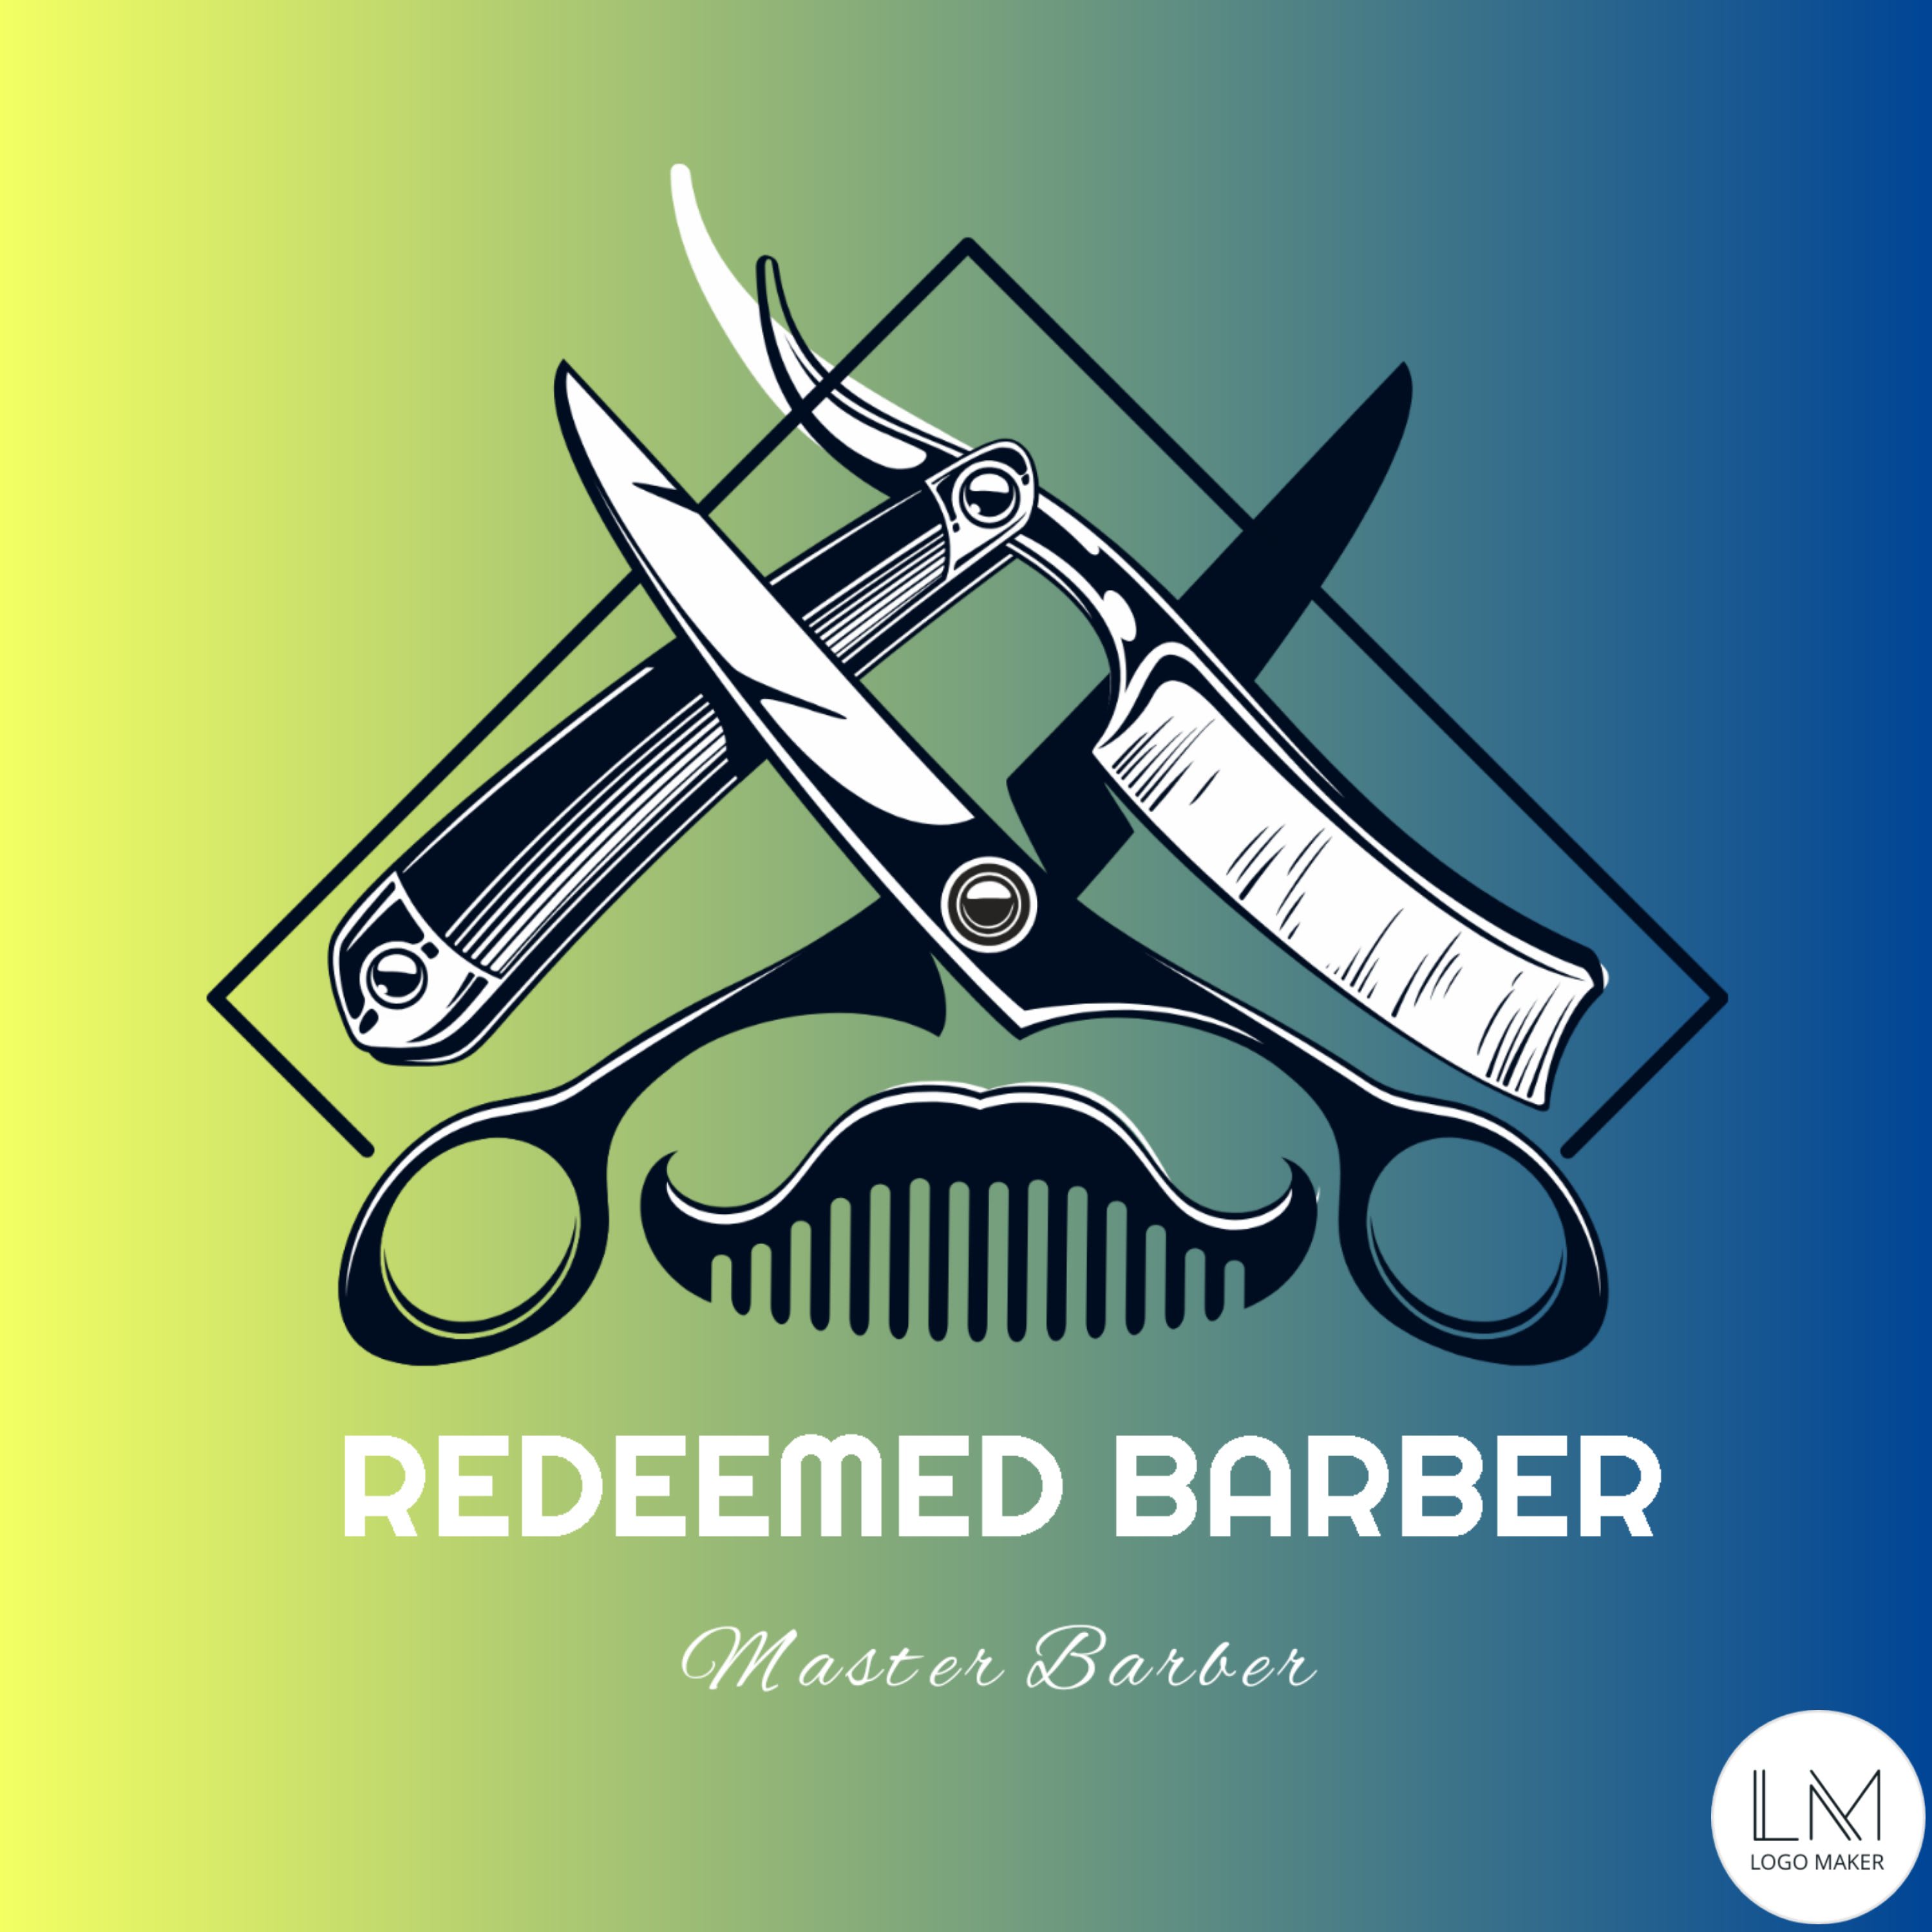 The Redeemed Barber